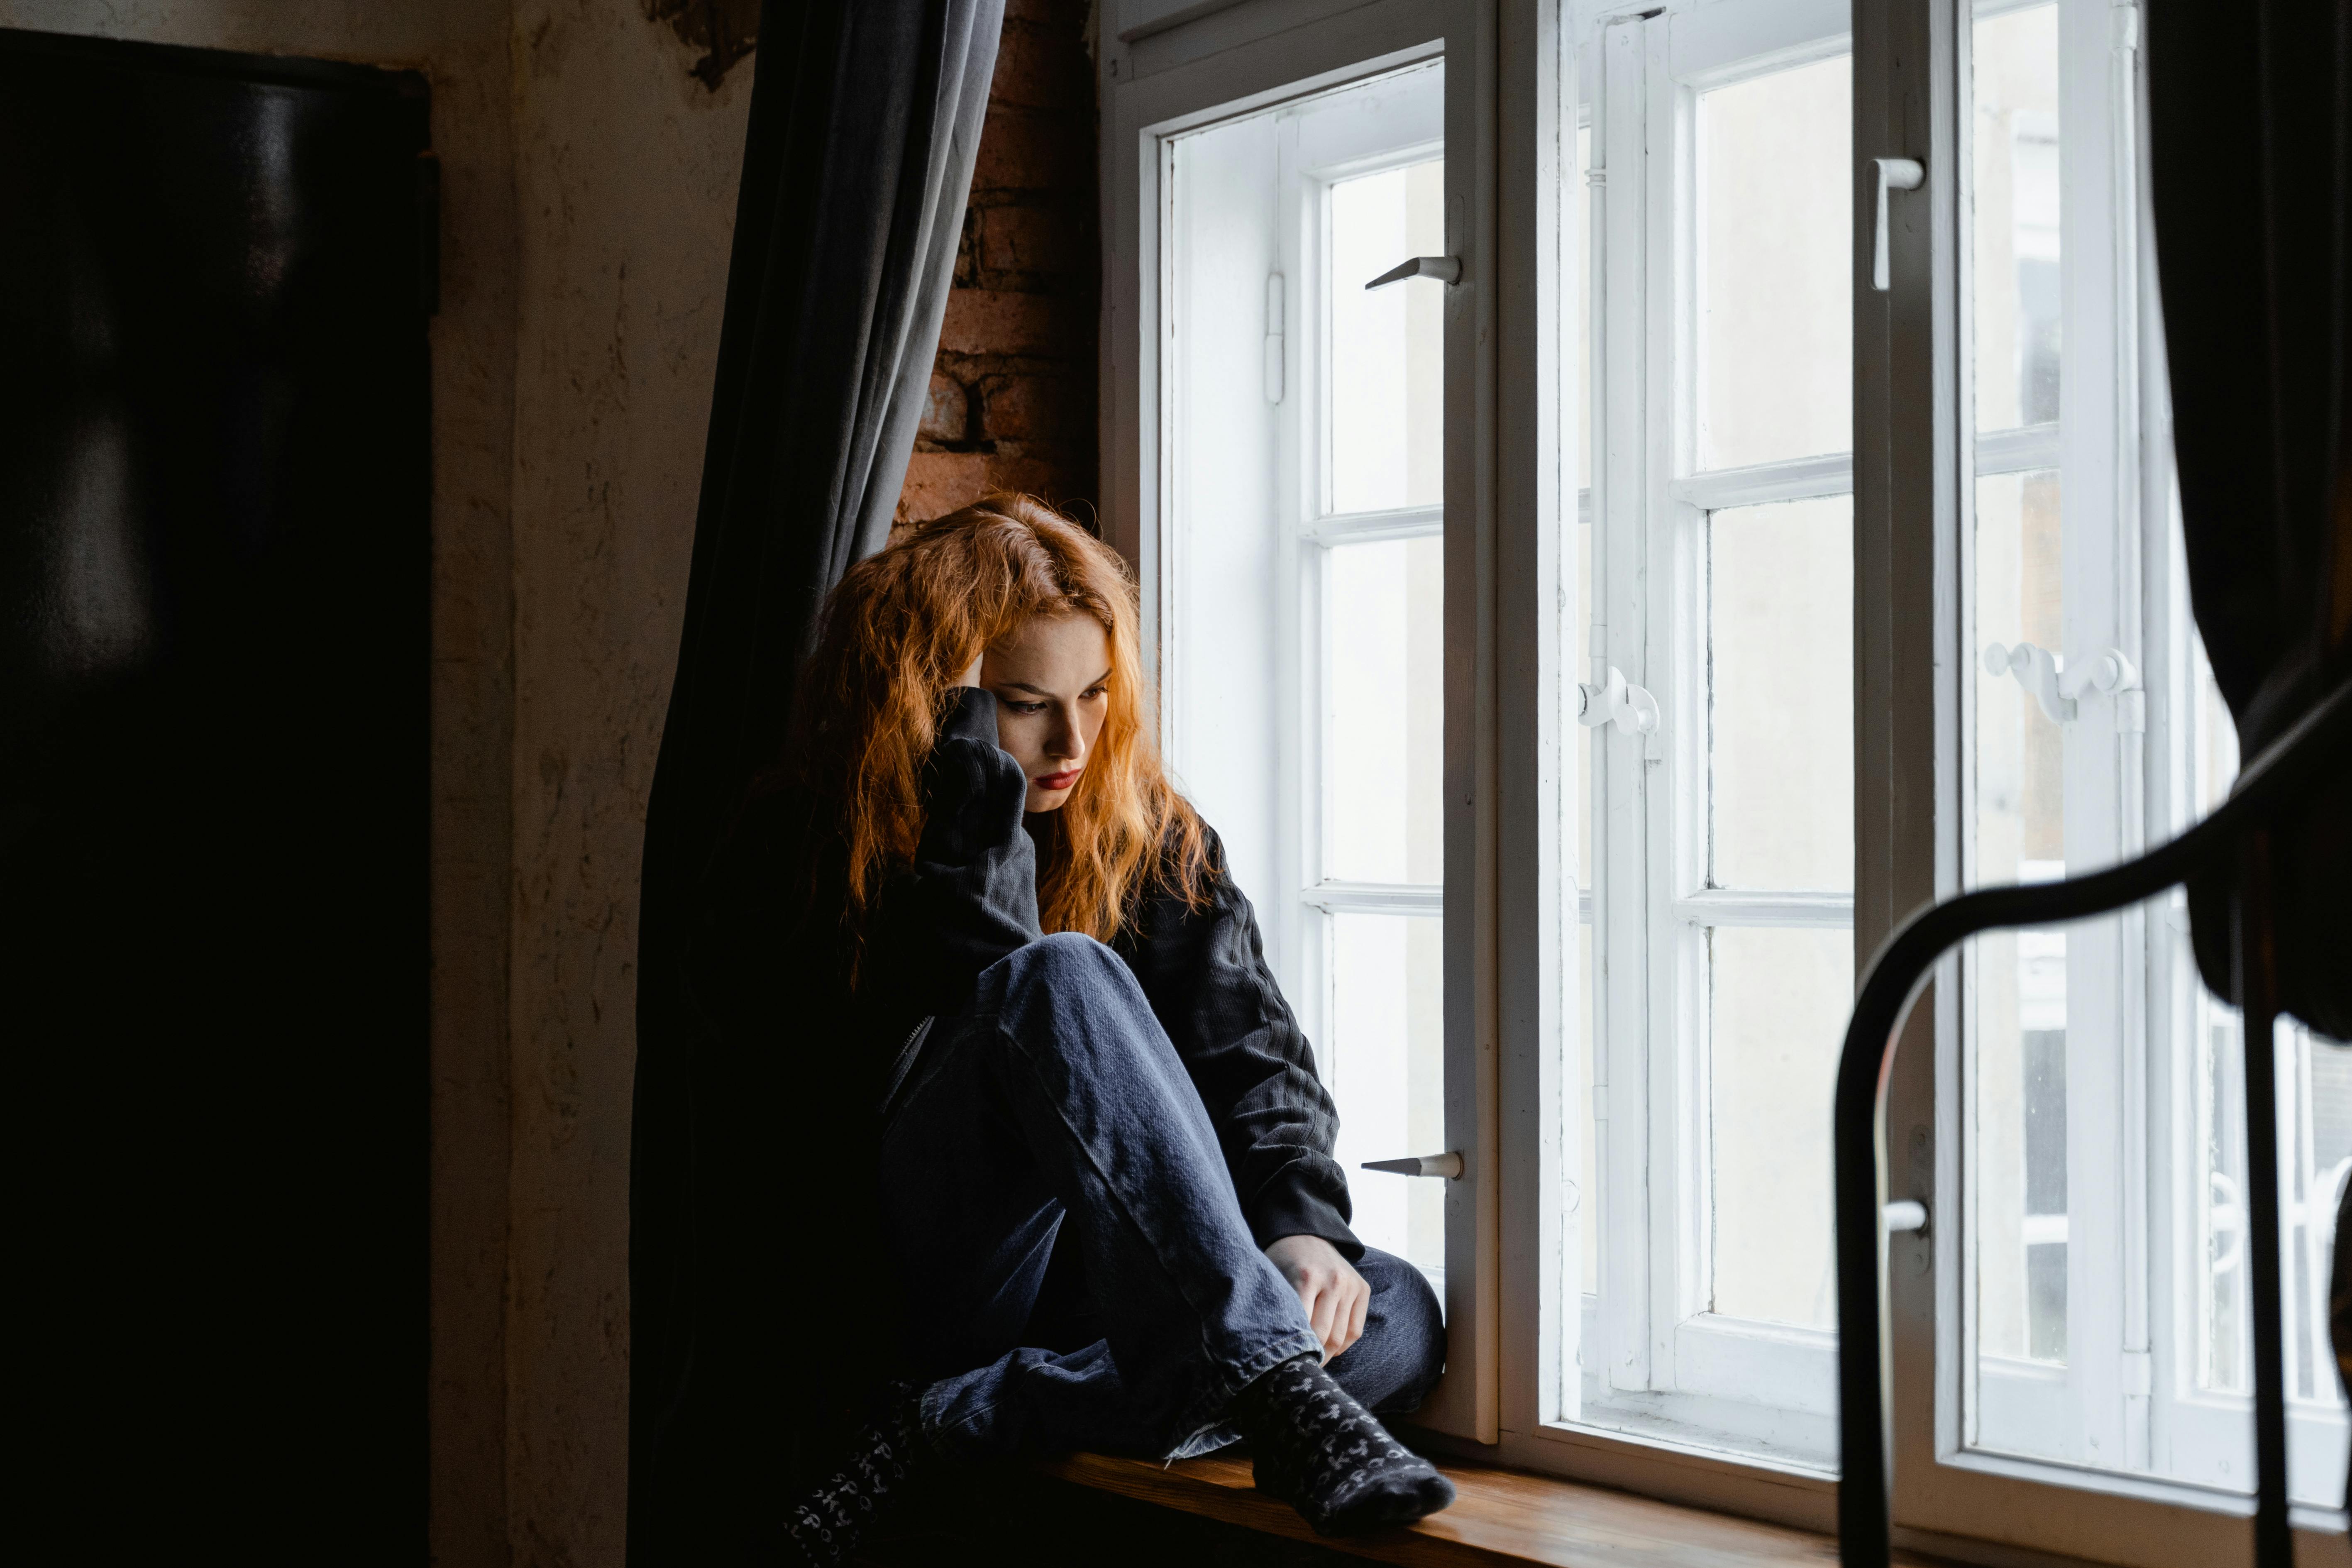 A woman sitting by the window | Source: Pexels